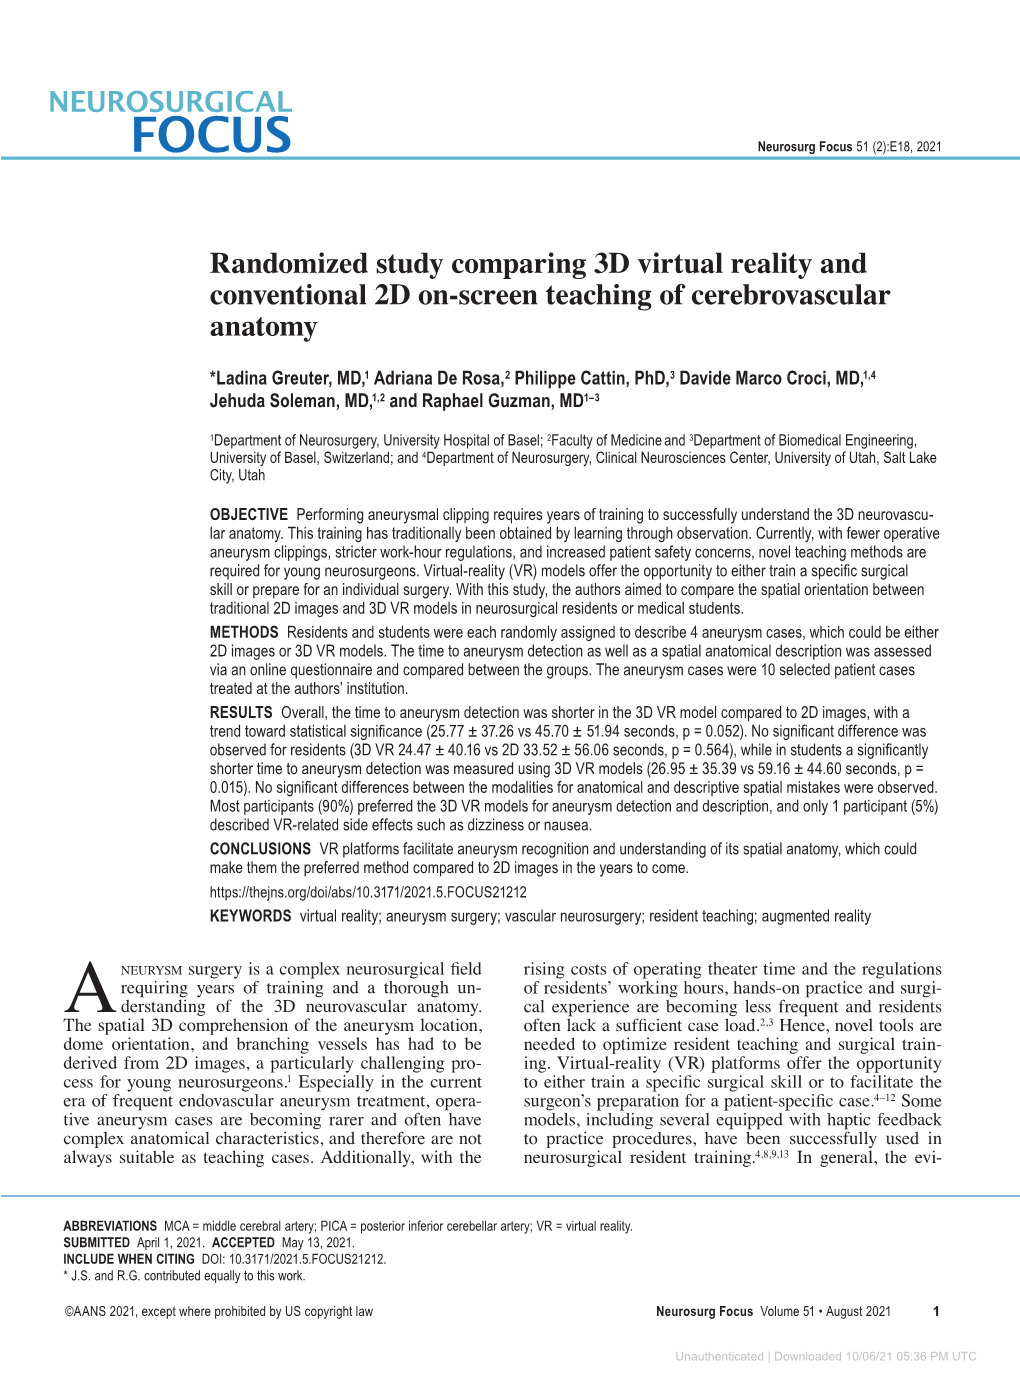 Randomized Study Comparing 3D Virtual Reality and Conventional 2D On-Screen Teaching of Cerebrovascular Anatomy